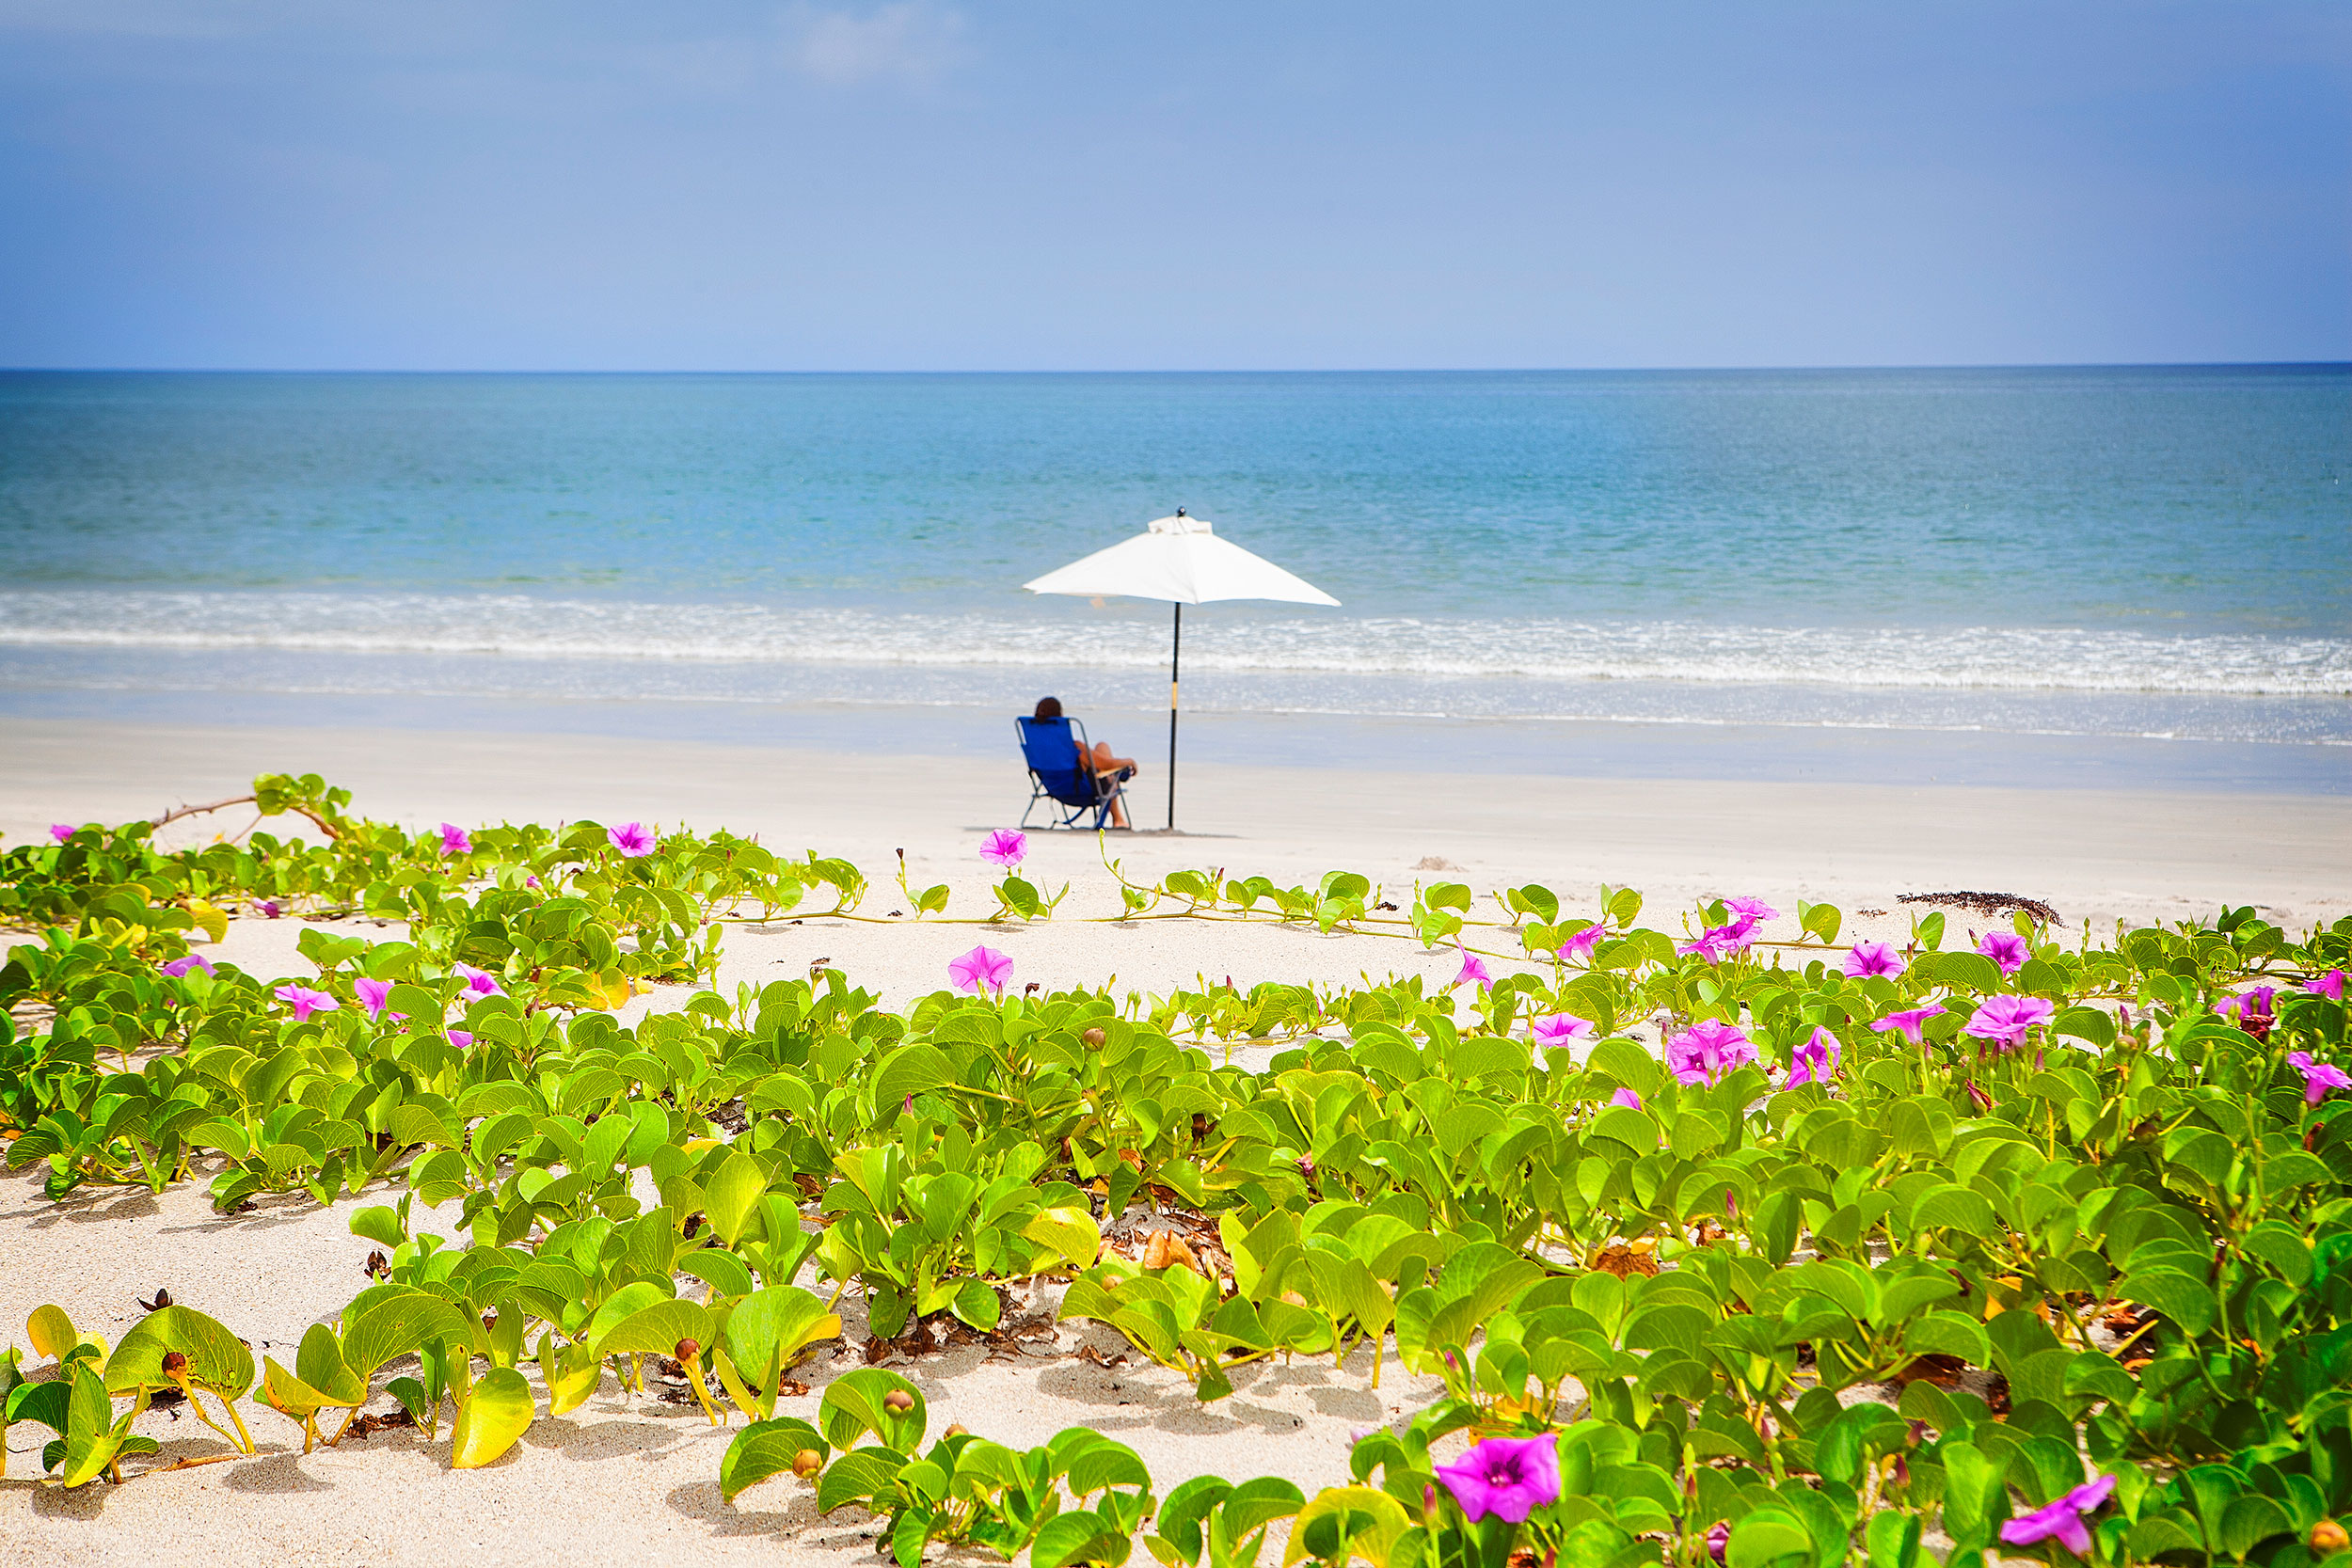 Sunny view of the horizon on a white sandy beach. In the distance, a person lounges underneath a white umbrella.